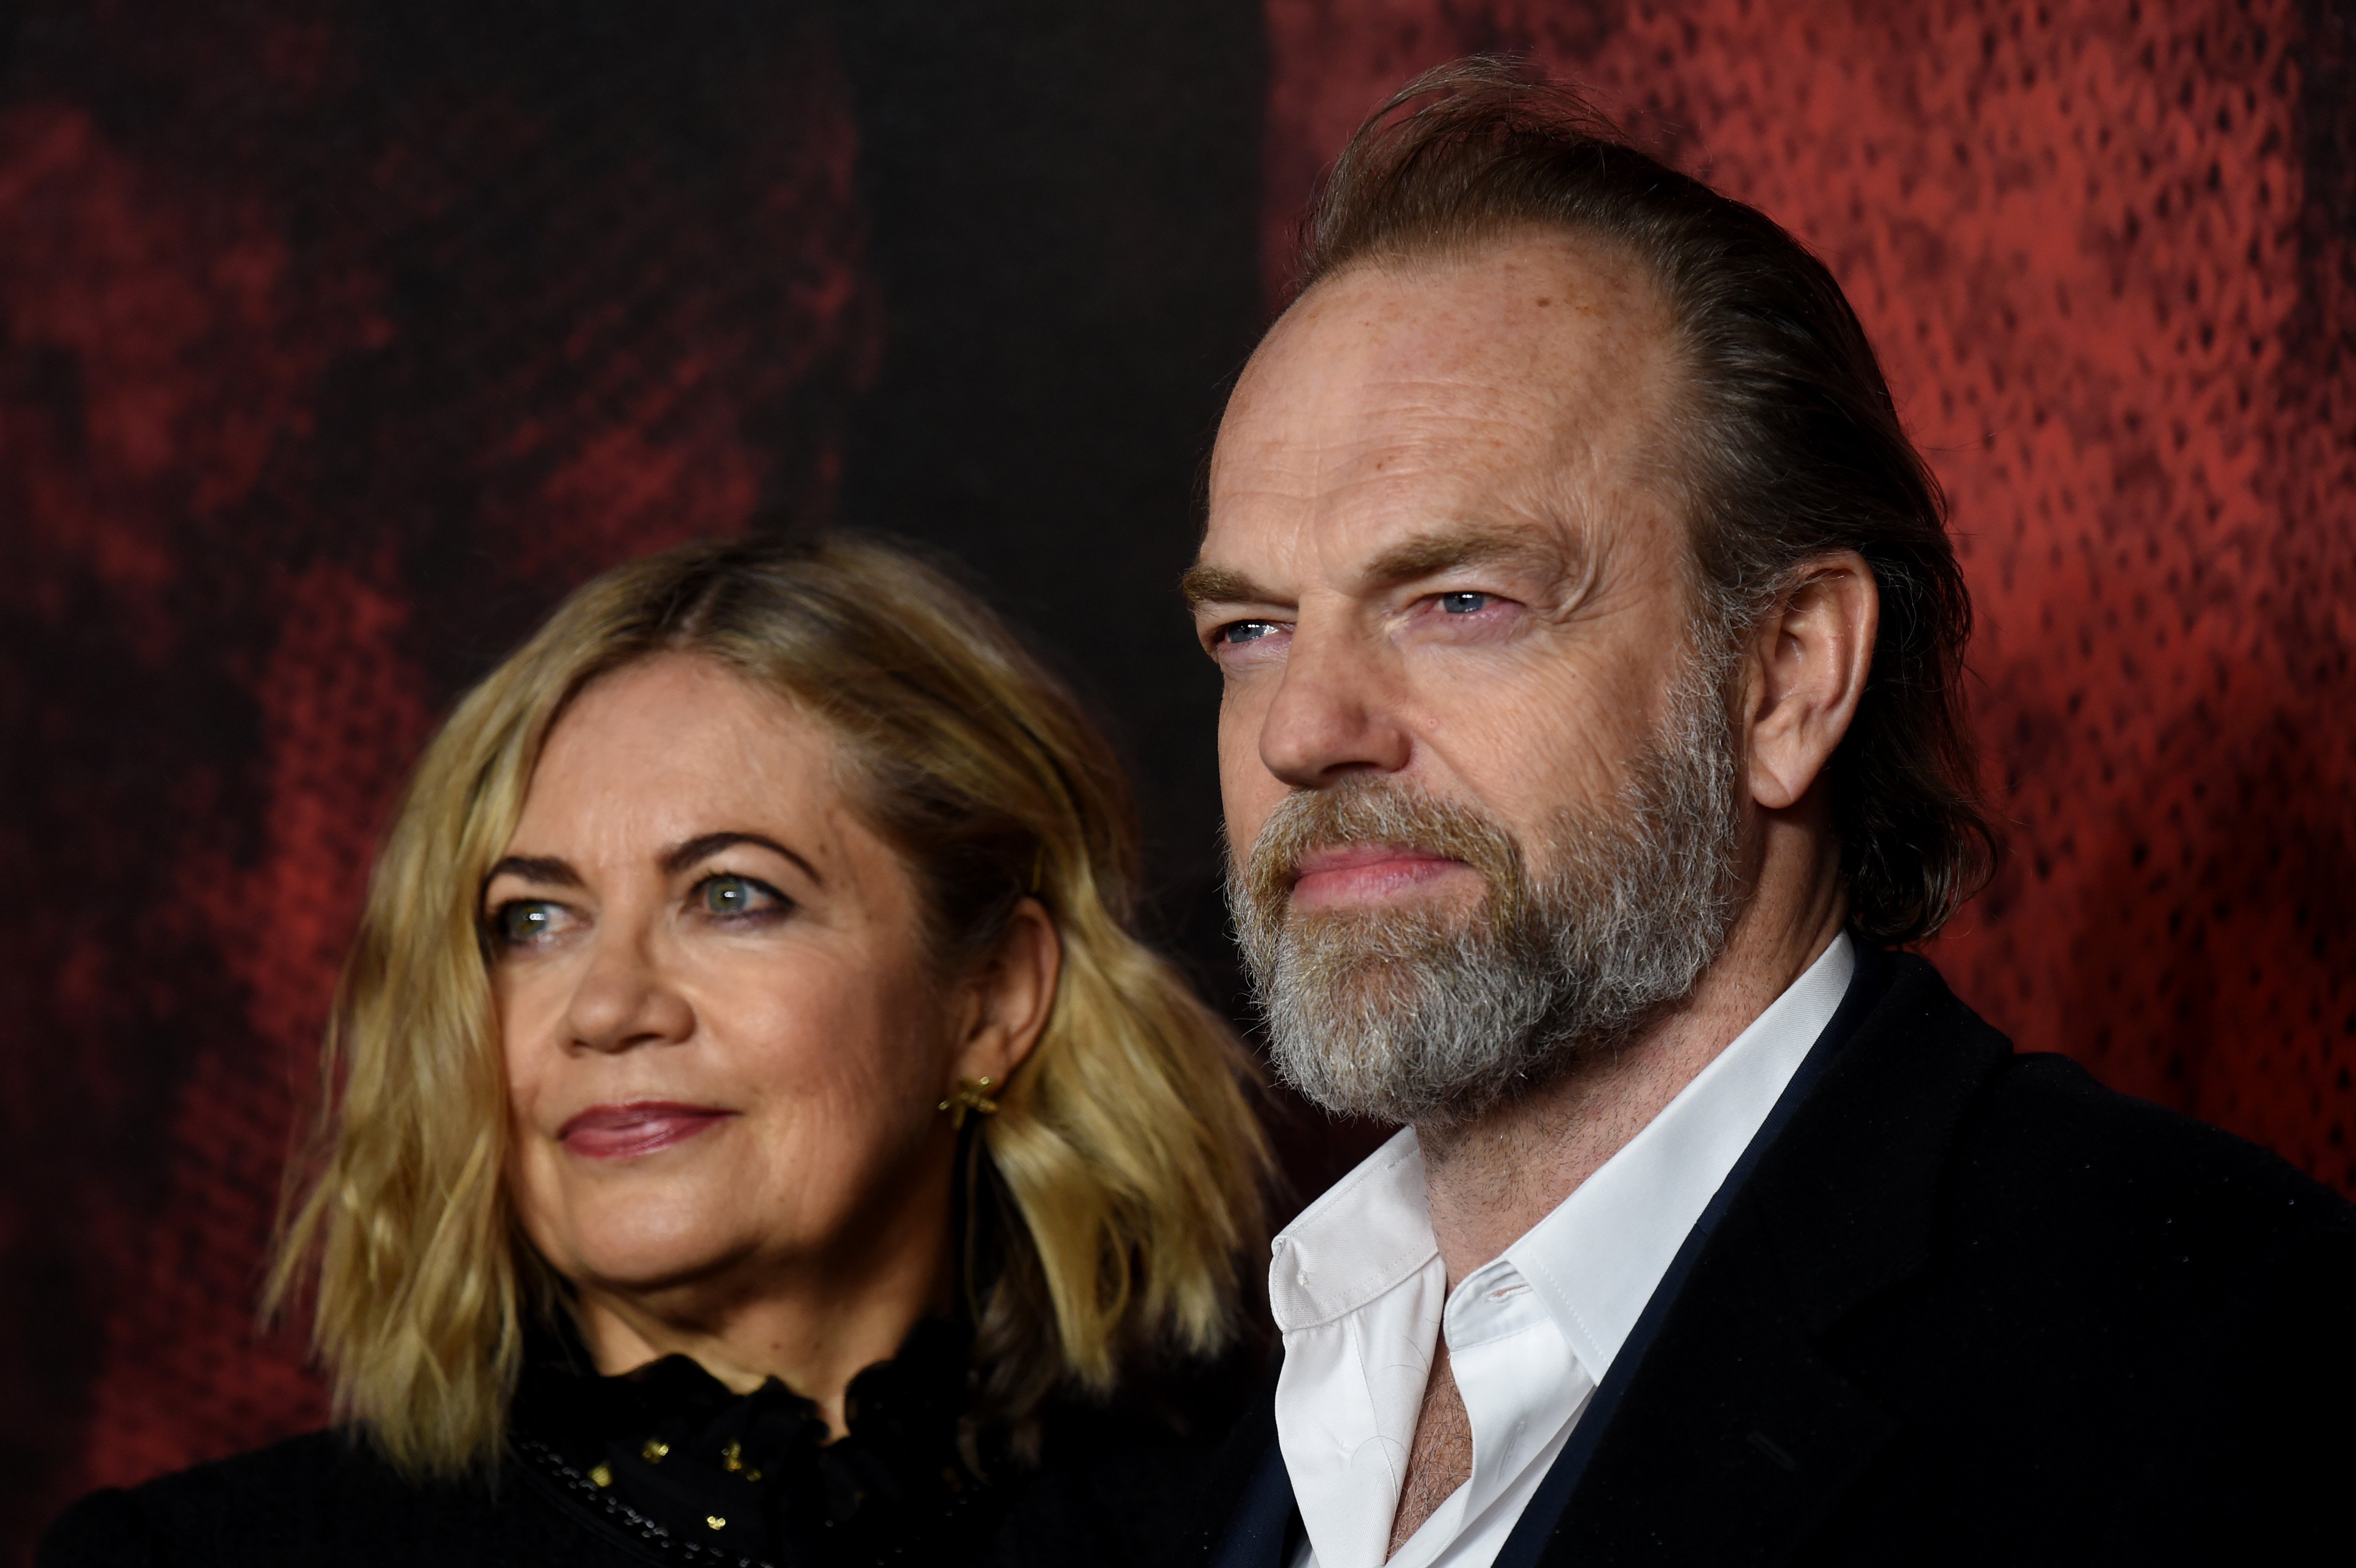 Katrina Greenwood and Hugo Weaving at the global premiere of "Mortal Engines" hosted at Cineworld Leicester Square in London, England, on November 27, 2018 | Source: Getty Images